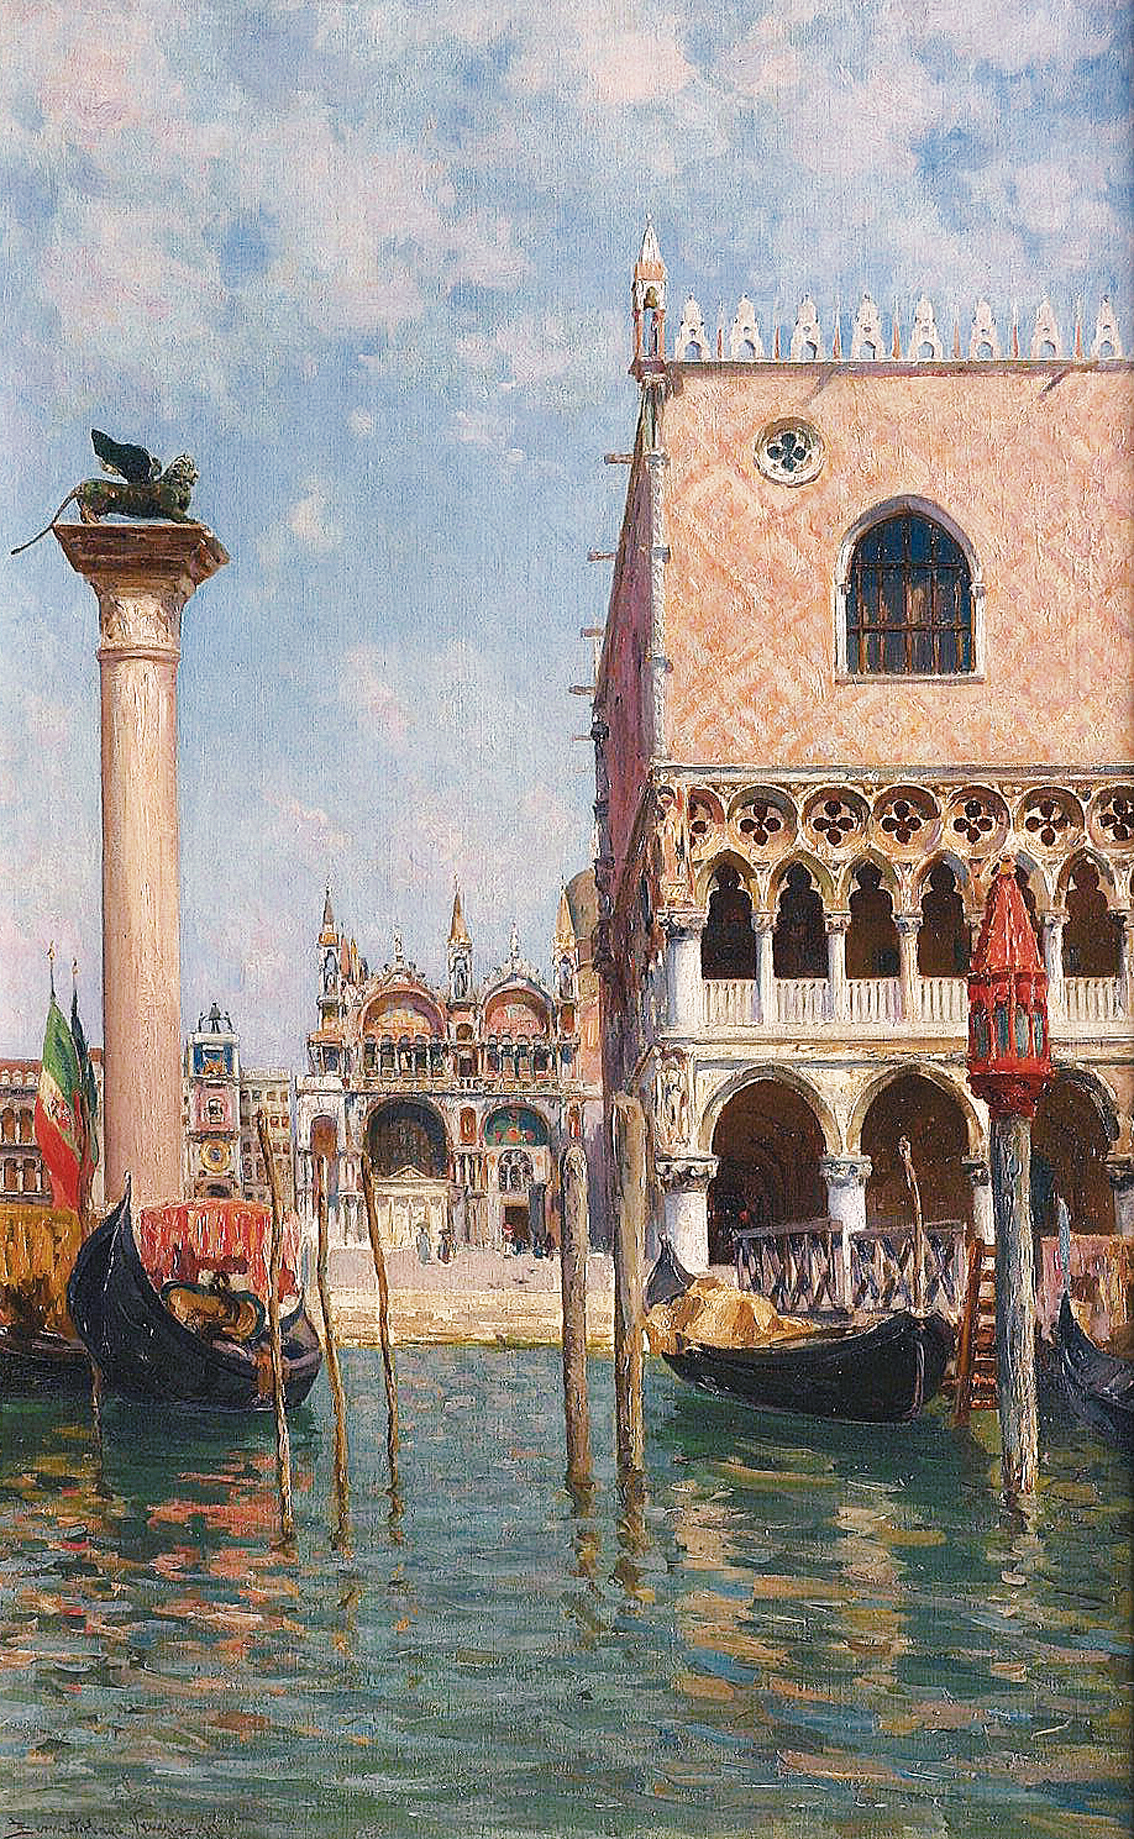 Venice: a view on Palazzo Ducale, Piazzetta and San Marco